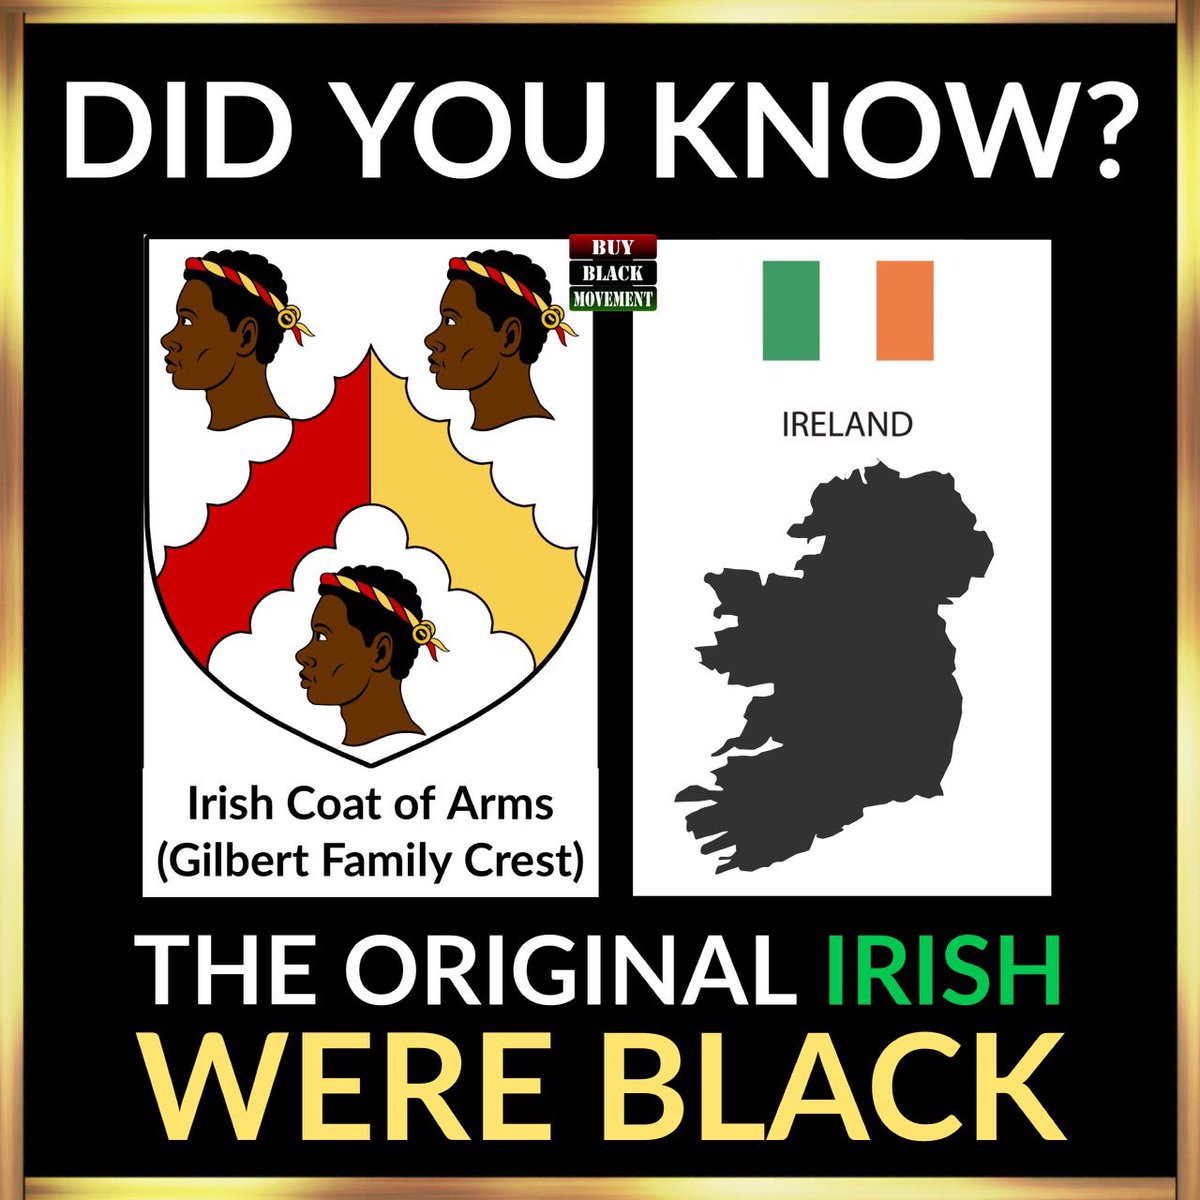 🤯Ireland too! Yes, multiple forms of scientific evidence has shown that the original inhabitants of Ireland were Black people! (Full post here: tinyurl.com/yckdf427) ❤️🖤💚Brought to you by BuyBlackMovement.com